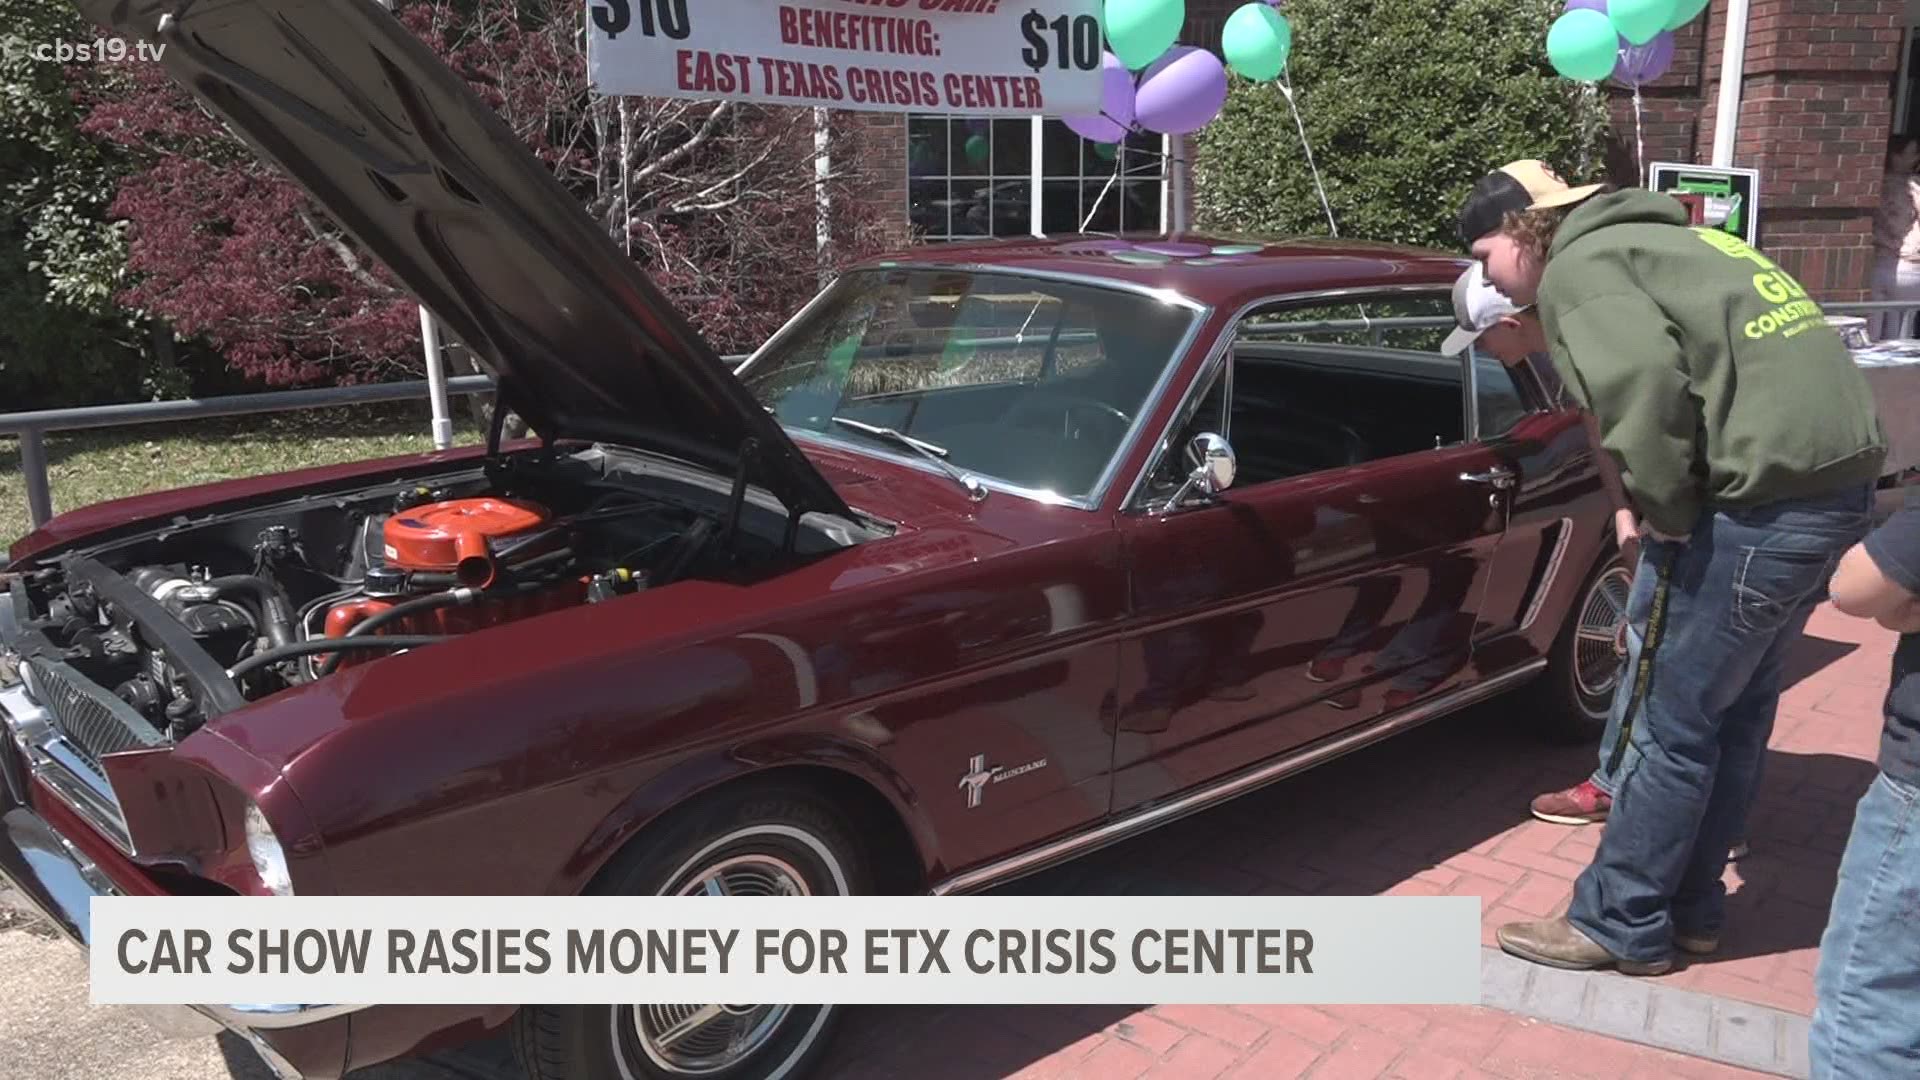 A 1965 Ford Mustang was raffled off.